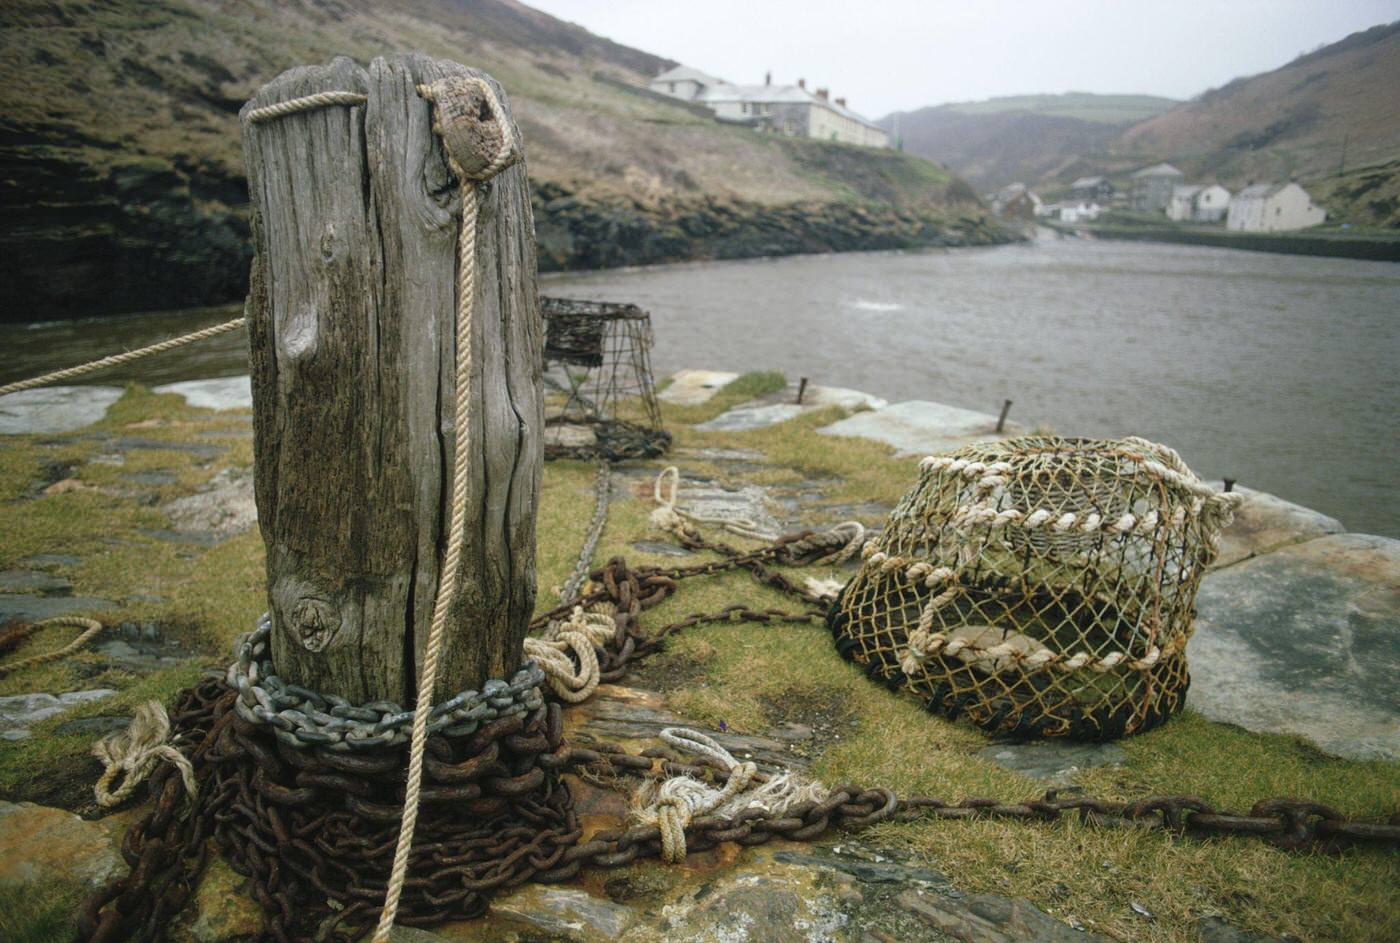 Mooring post with chains and fishing baskets, Boscastle port, Cornwall, April 1970.